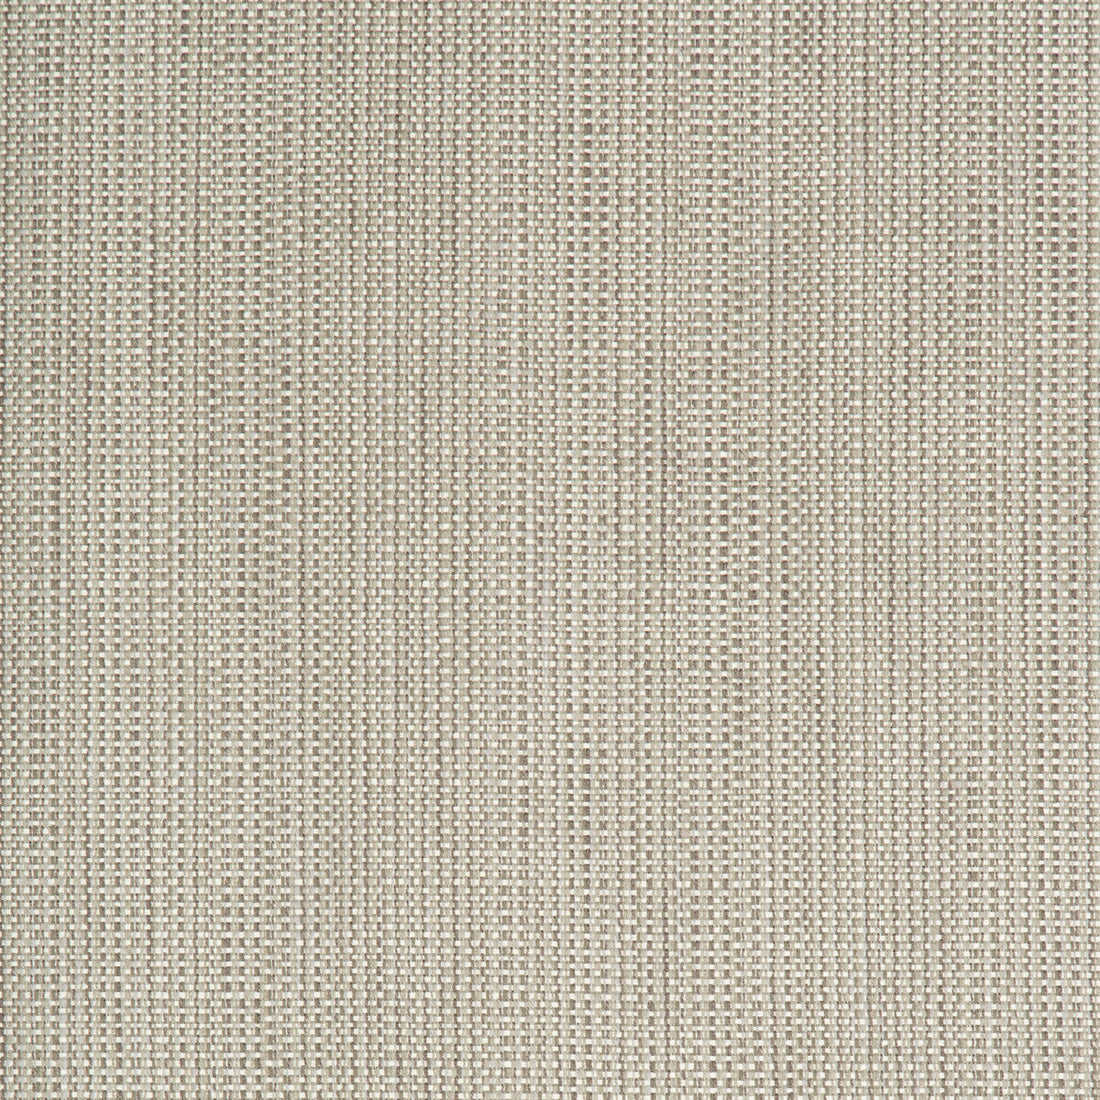 Kravet Contract fabric in 34634-11 color - pattern 34634.11.0 - by Kravet Contract in the Crypton Incase collection